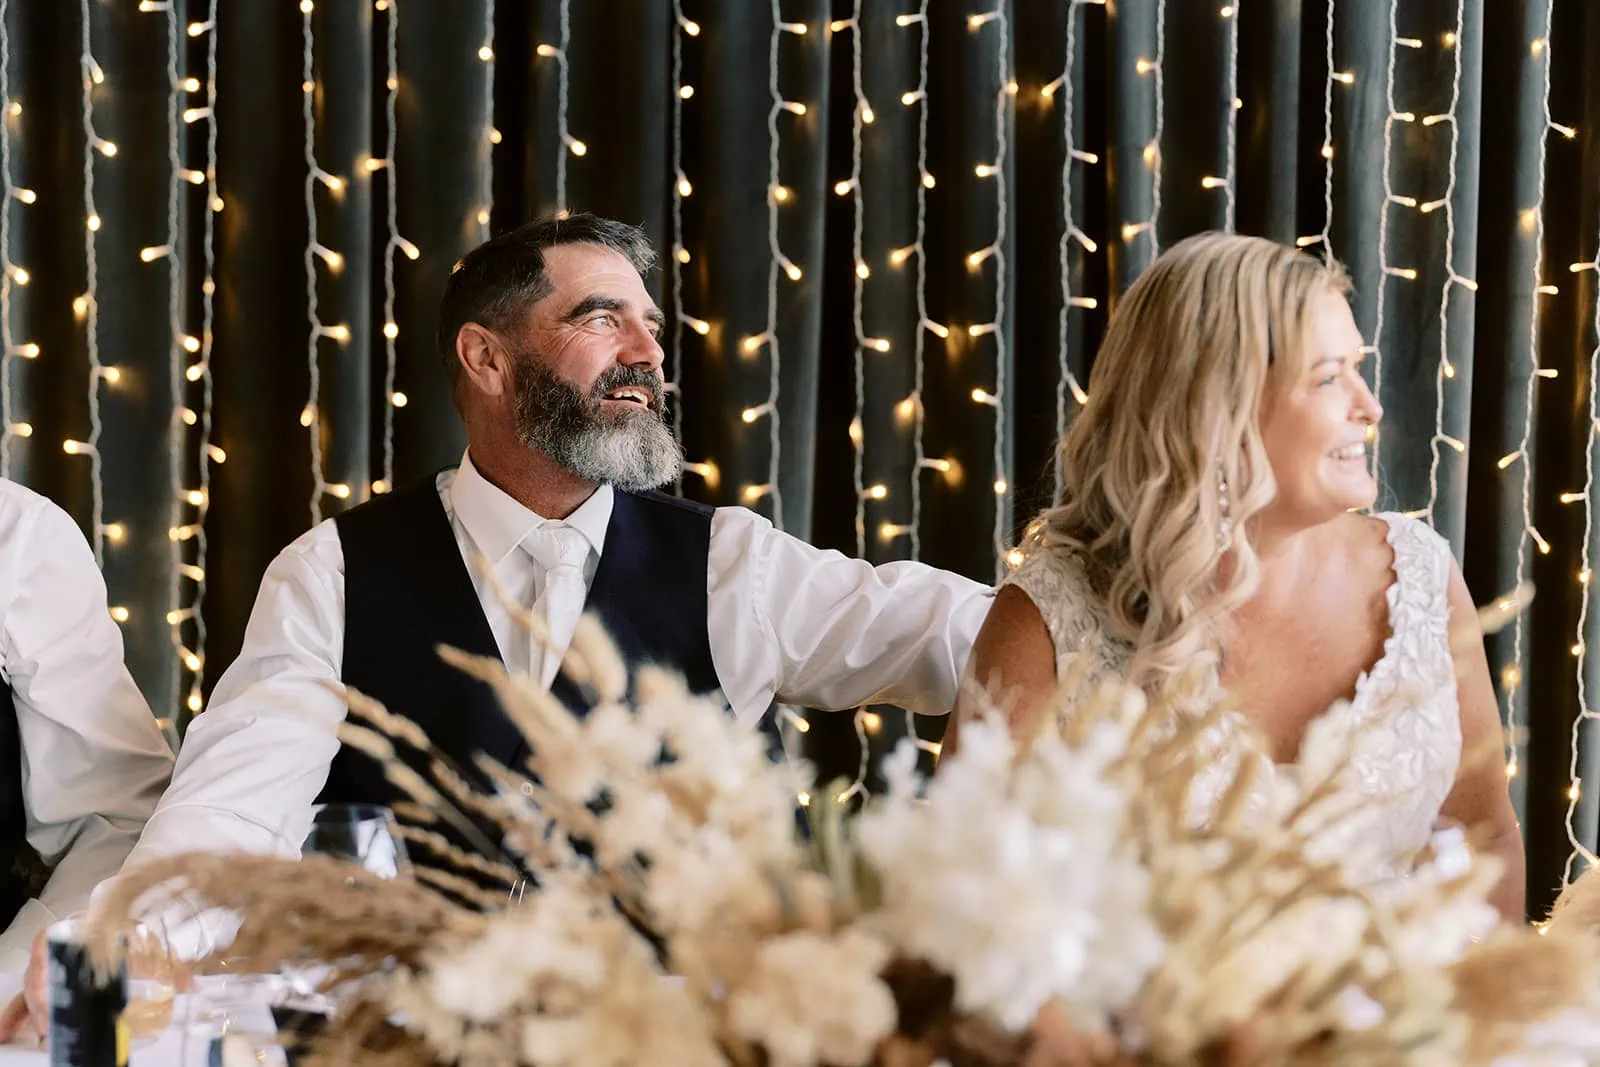 Queenstown Elopement Heli Wedding Photographer クイーンズタウン結婚式 | Melissa & Scott, a bride and groom, share an exuberant moment of laughter at their wedding reception held at Kamana Lakehouse in Queenstown.